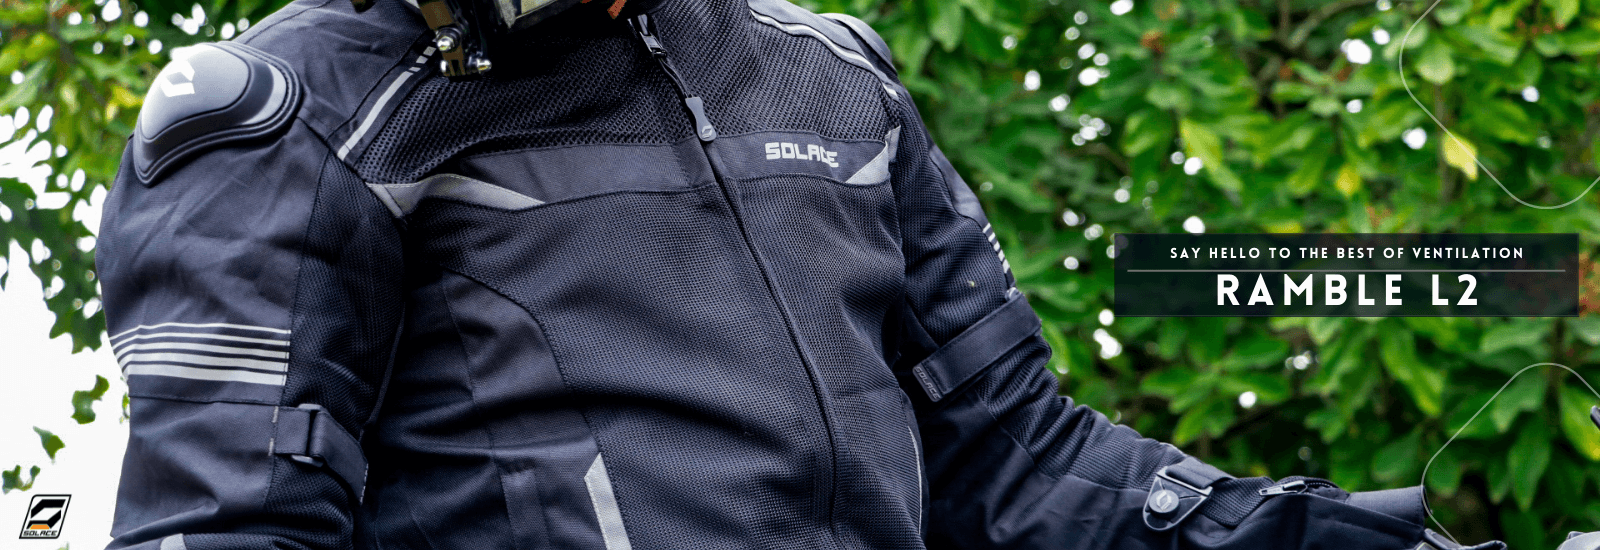 Bikes and riding gears go hand in hand. Riding jacket, riding pants, riding gloves and riding boots, not to forget a good helmet. There are a lot of brands in this realm, say the big boys like Alpinestars, Dainese and countless more.